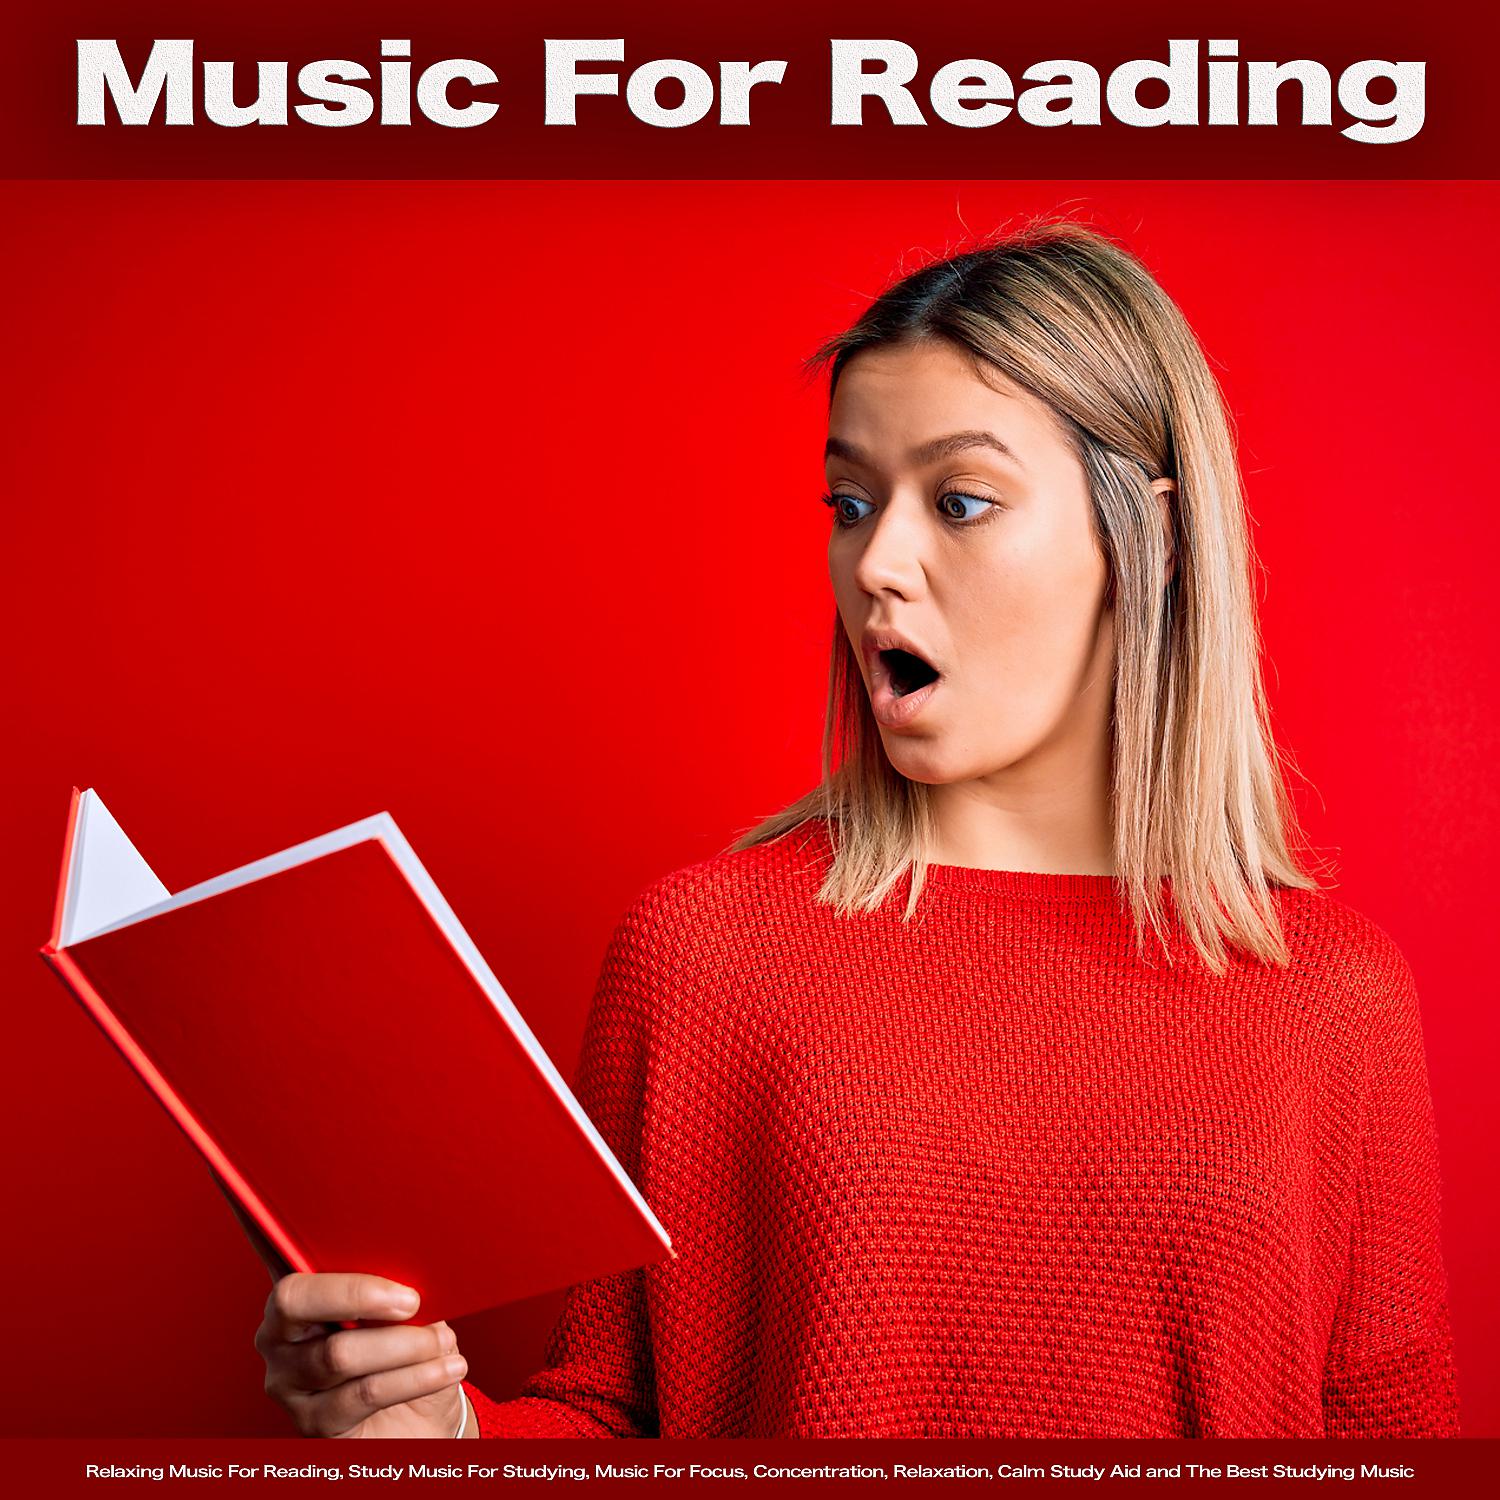 Постер альбома Music For Reading: Relaxing Music For Reading, Study Music For Studying, Music For Focus, Concentration, Relaxation, Calm Study Aid and The Best Studying Music